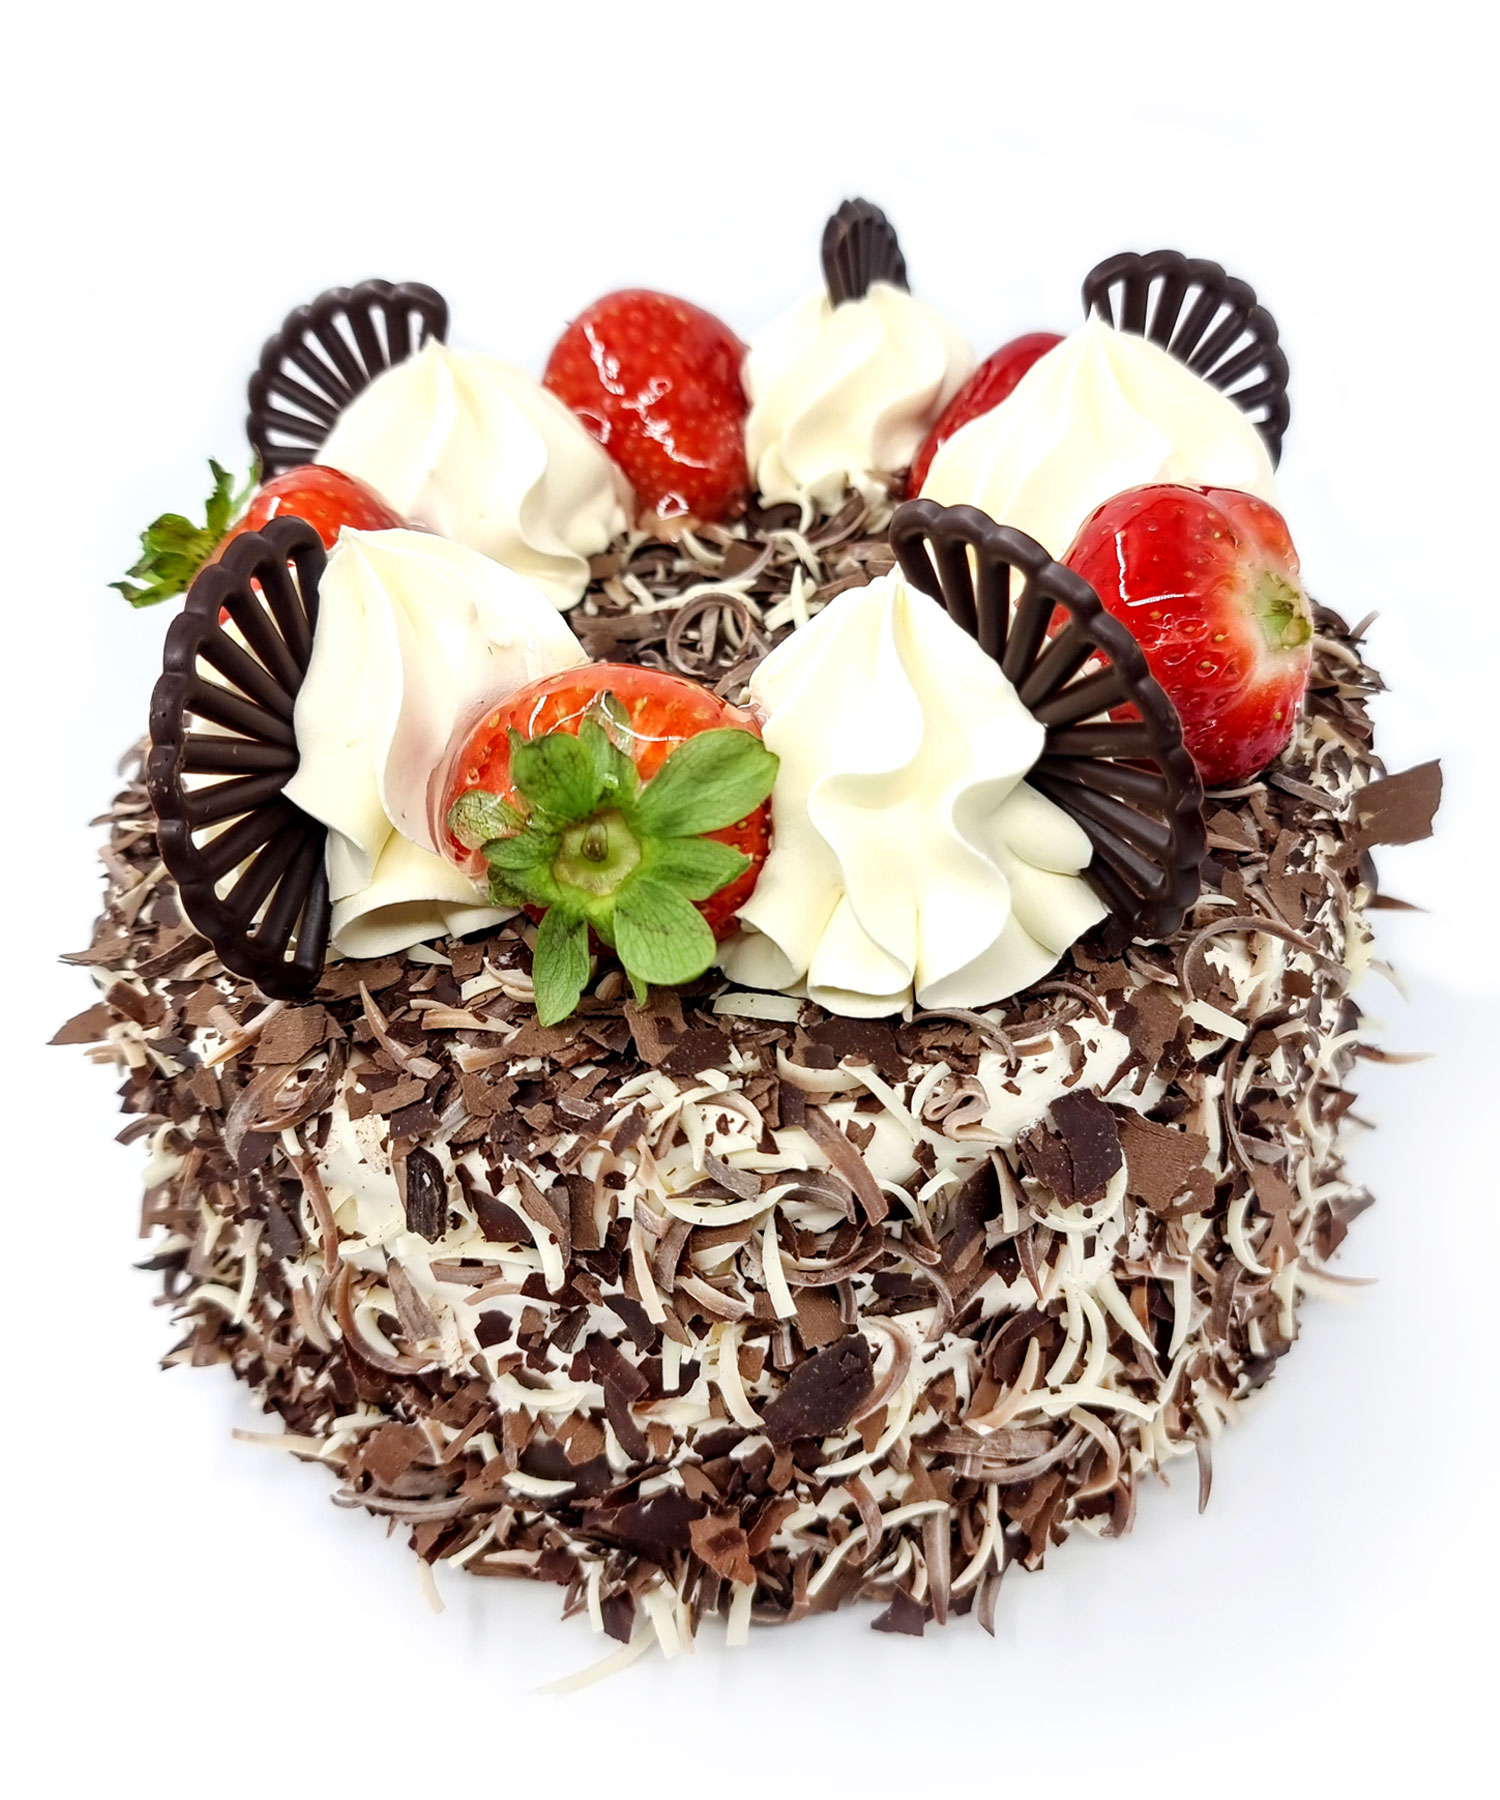 Exotic Chocolate Cream Cake - Buy, Send & Order Online Delivery In India -  Cake2homes